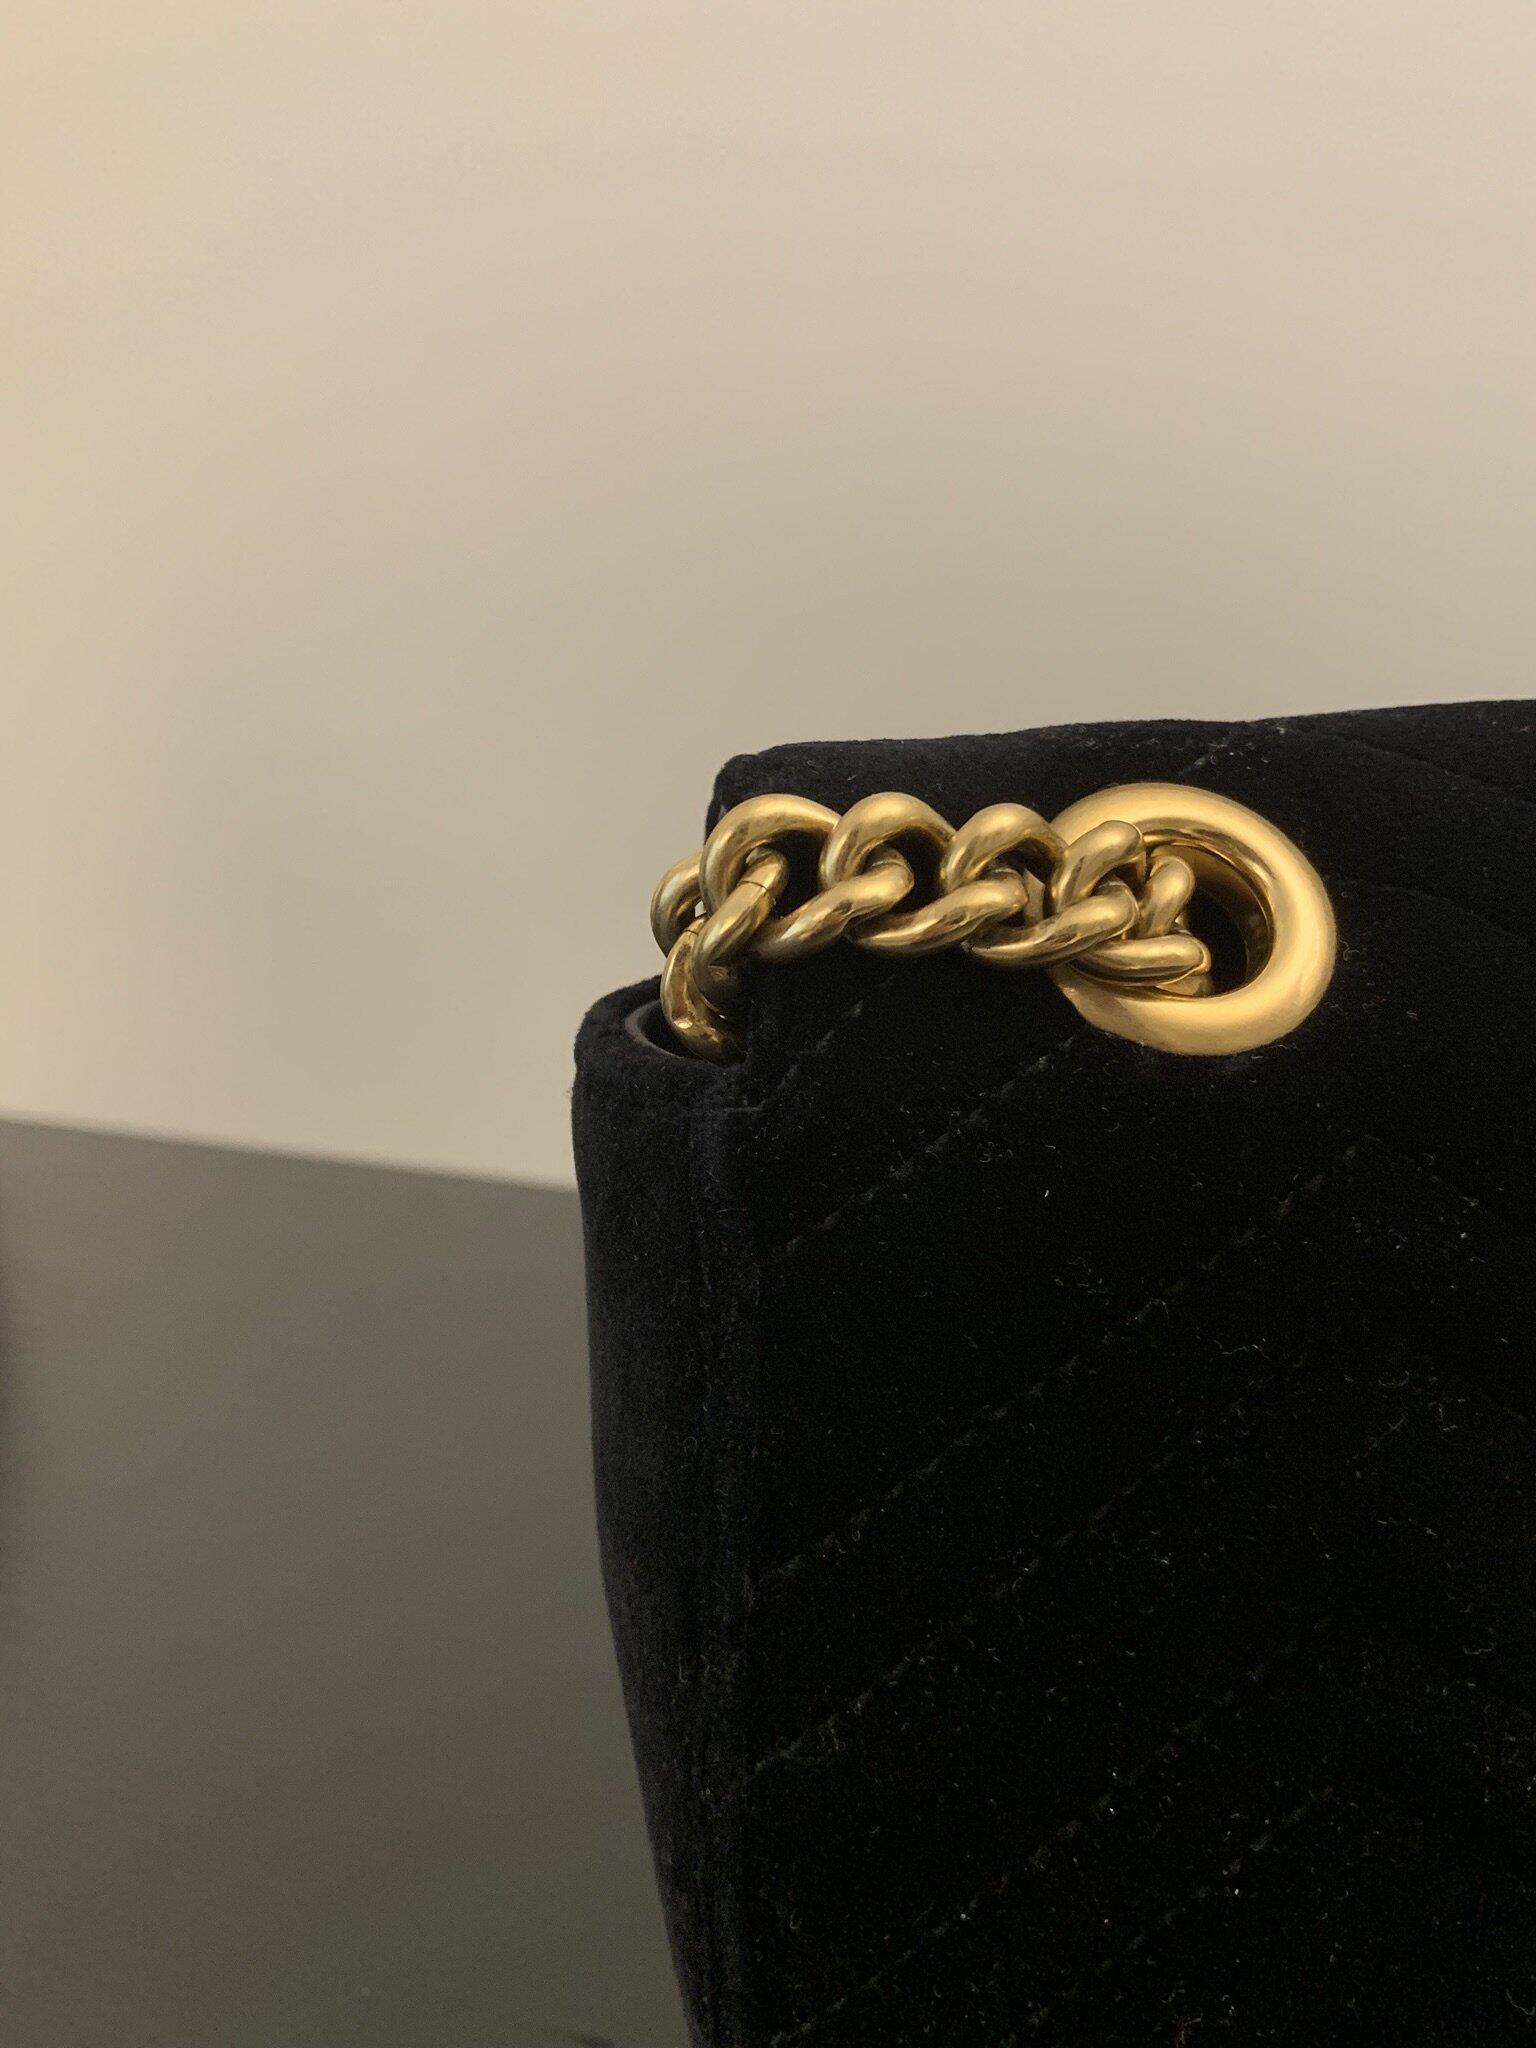 Wear and Tear Update - Gucci GG Marmont Velvet Mini Bag — EMTHAW